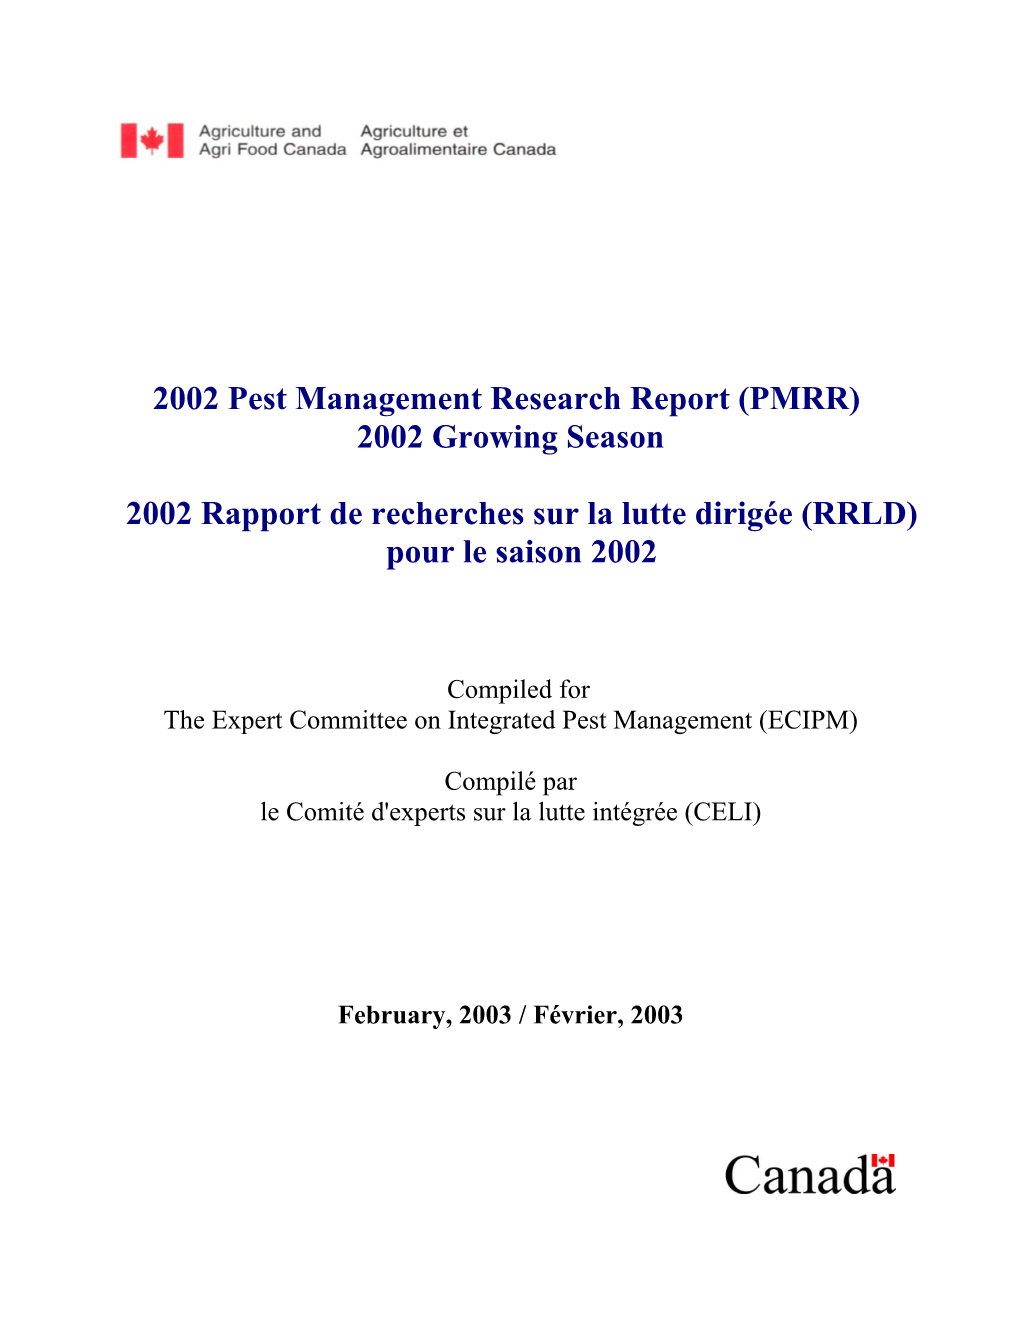 2002 Pest Management Research Report (PMRR) 2002 Growing Season